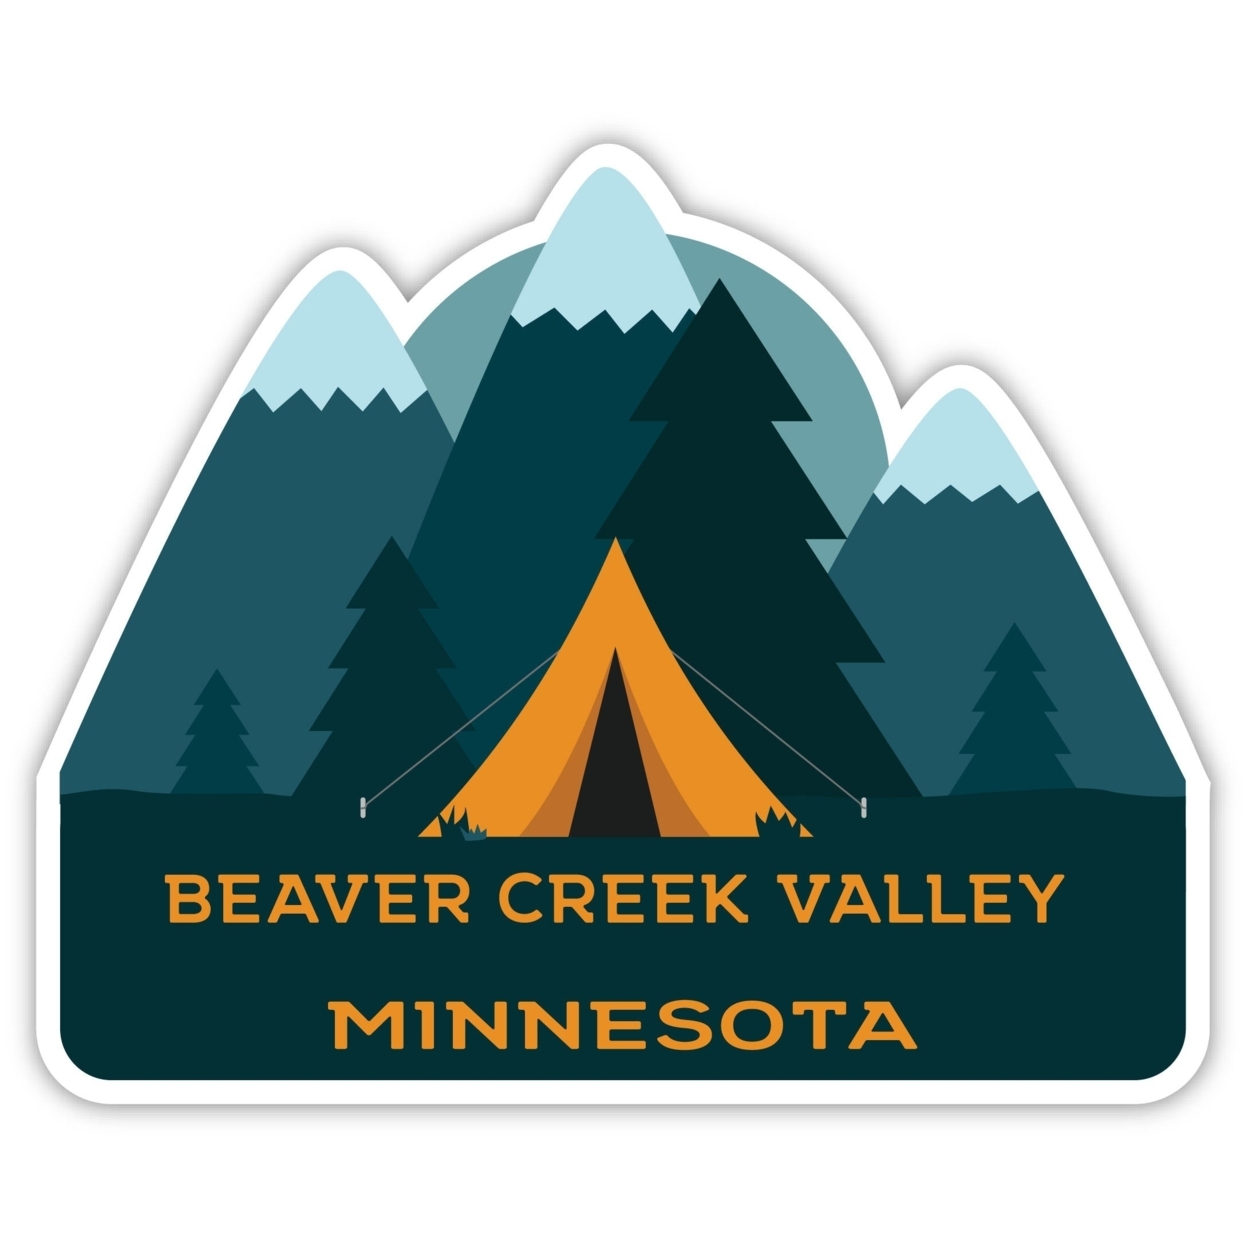 Beaver Creek Valley Minnesota Souvenir Decorative Stickers (Choose Theme And Size) - 4-Pack, 8-Inch, Tent